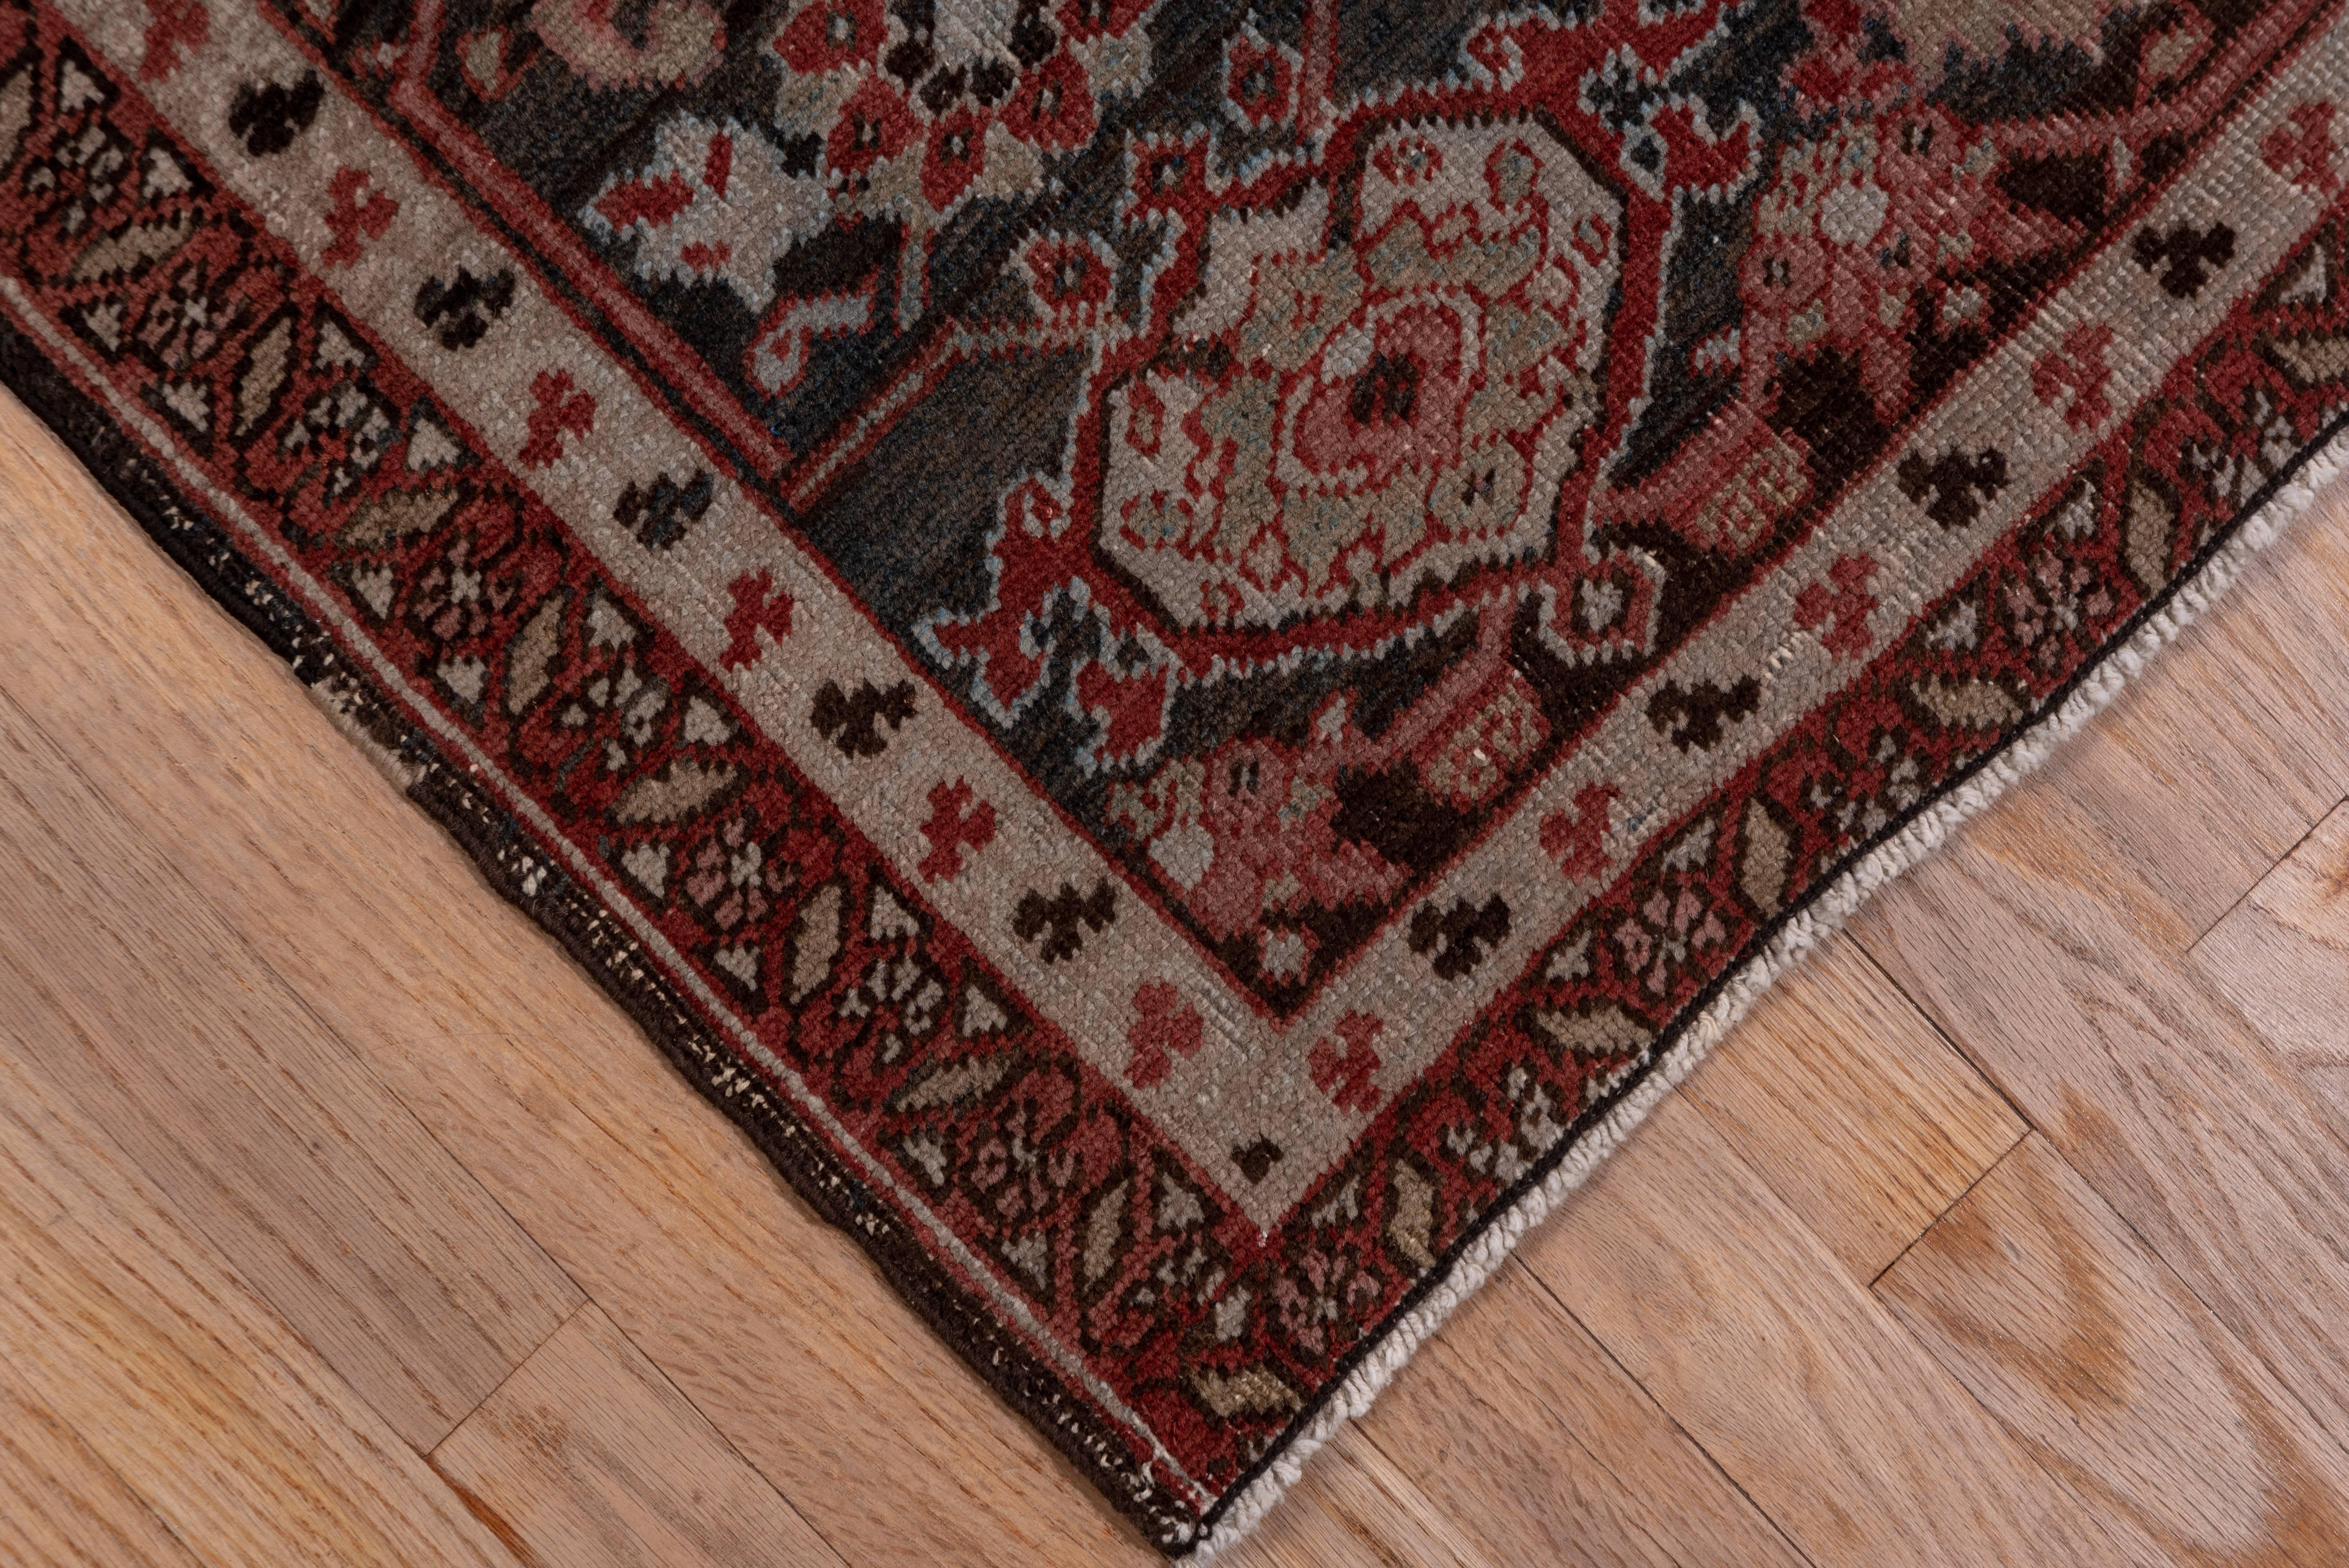 Of tighter 'Serapi' quality, this NW Persian rural carpet is heavily work, but it still retains genuine character with its red subfield centring a huge navy octogramme pendanted medallion. The extended ivory corners have serrated leaf motives. The